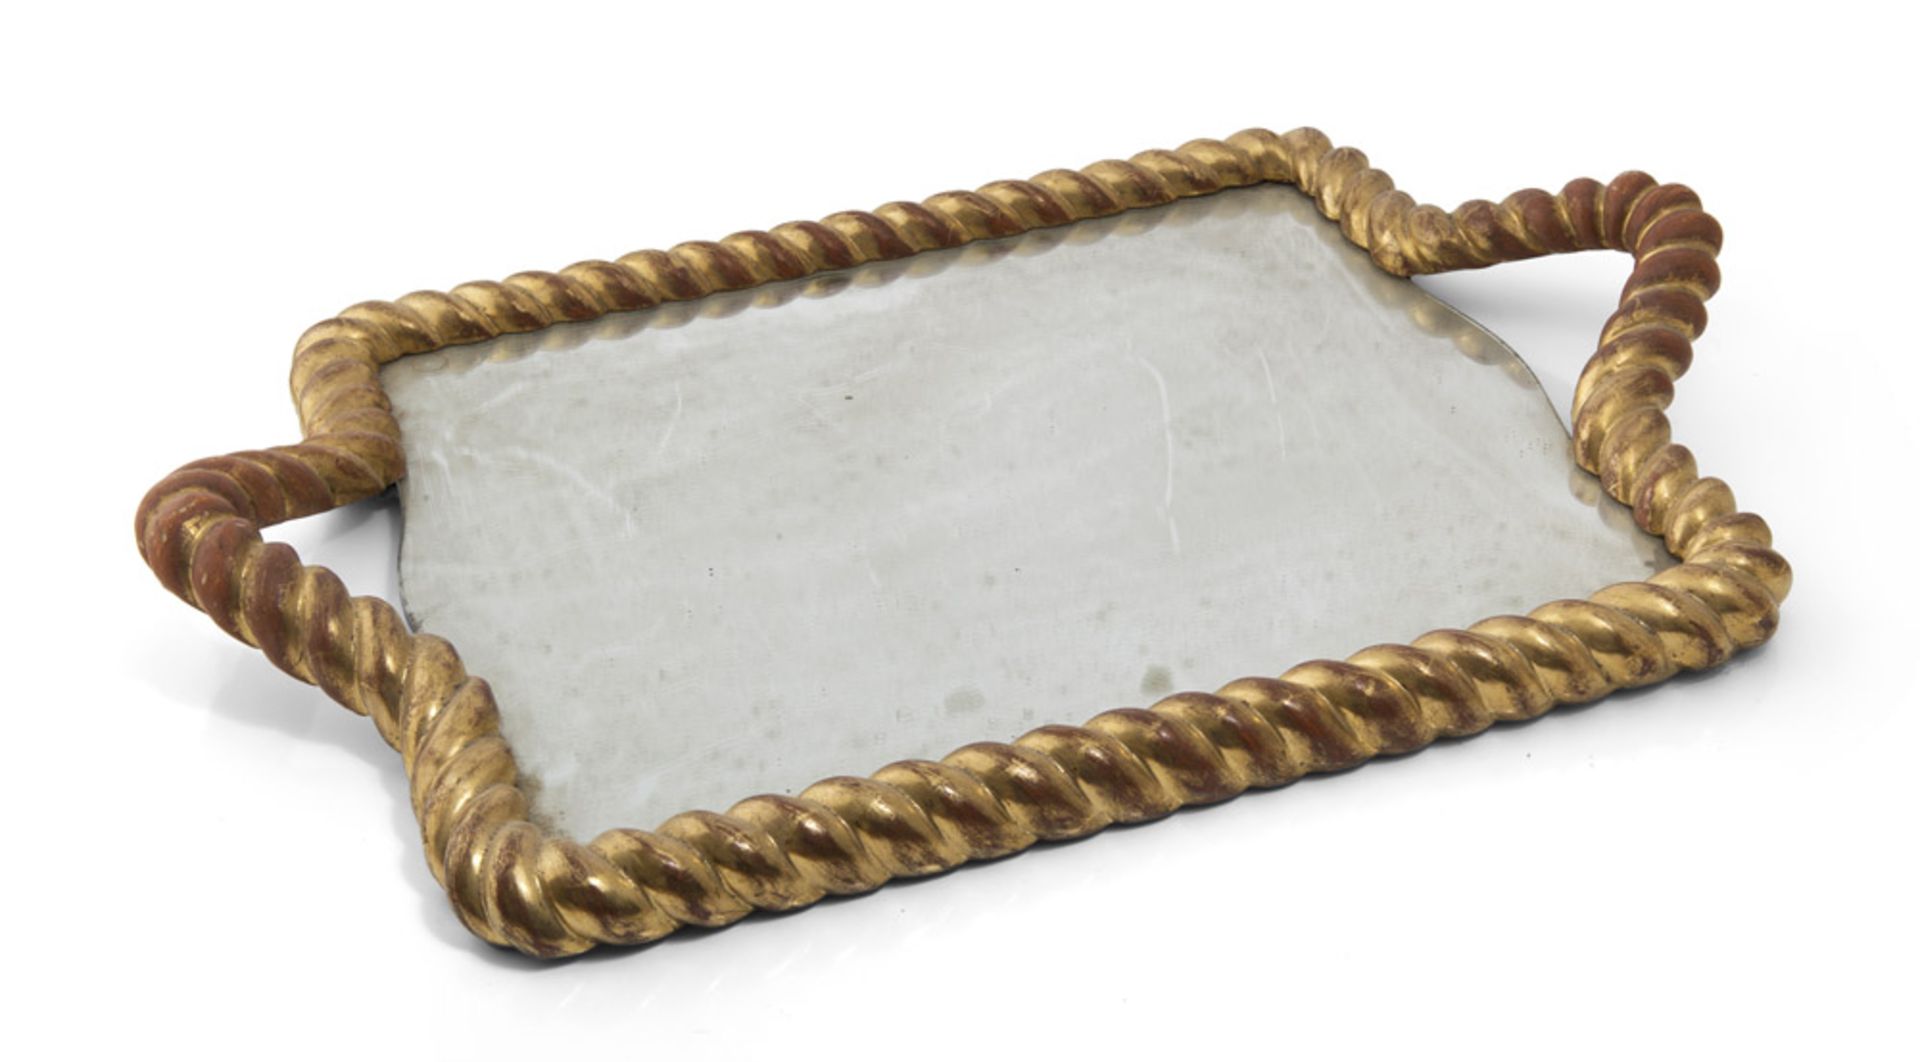 GILt WOOD TRAY, LATE 19TH CENTURY with cord edge and mirror dish. Measures cm. 72 x 48. VASSOIO IN